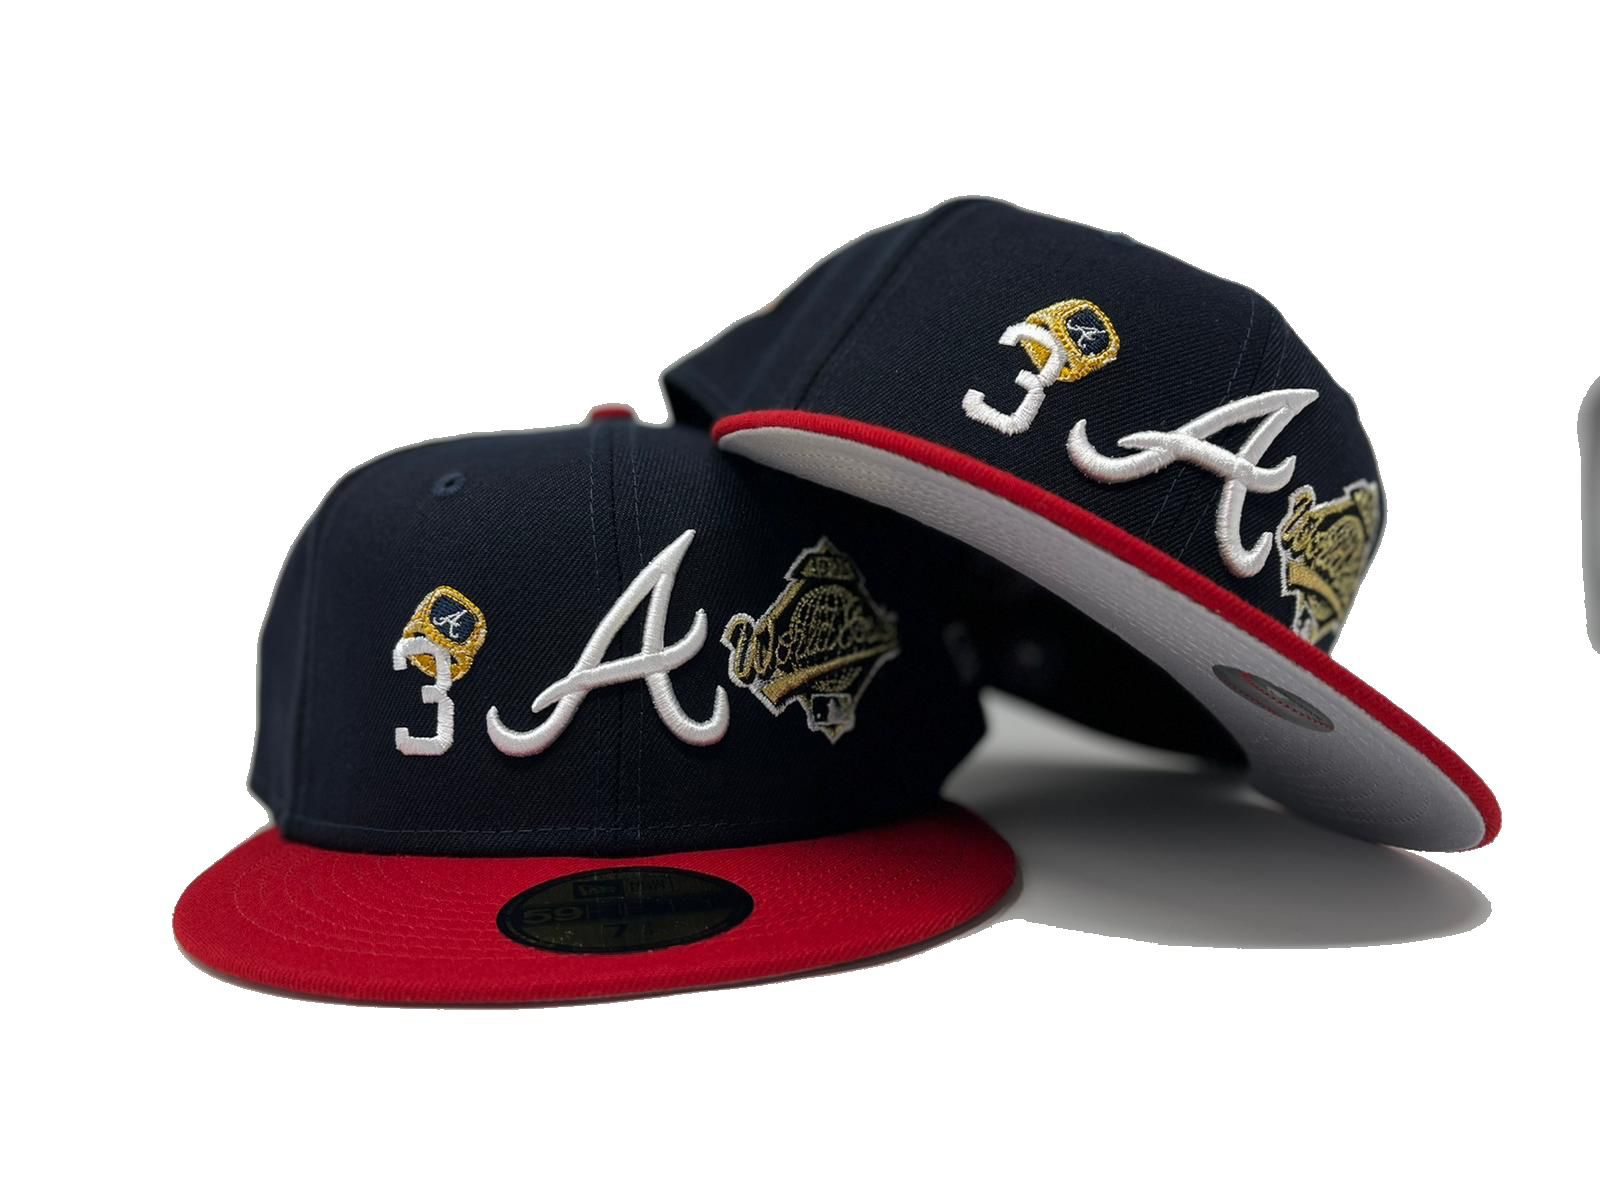 New Era Atlanta Braves World Series Champions 2021 59Fifty Fitted Hat, FITTED HATS, CAPS